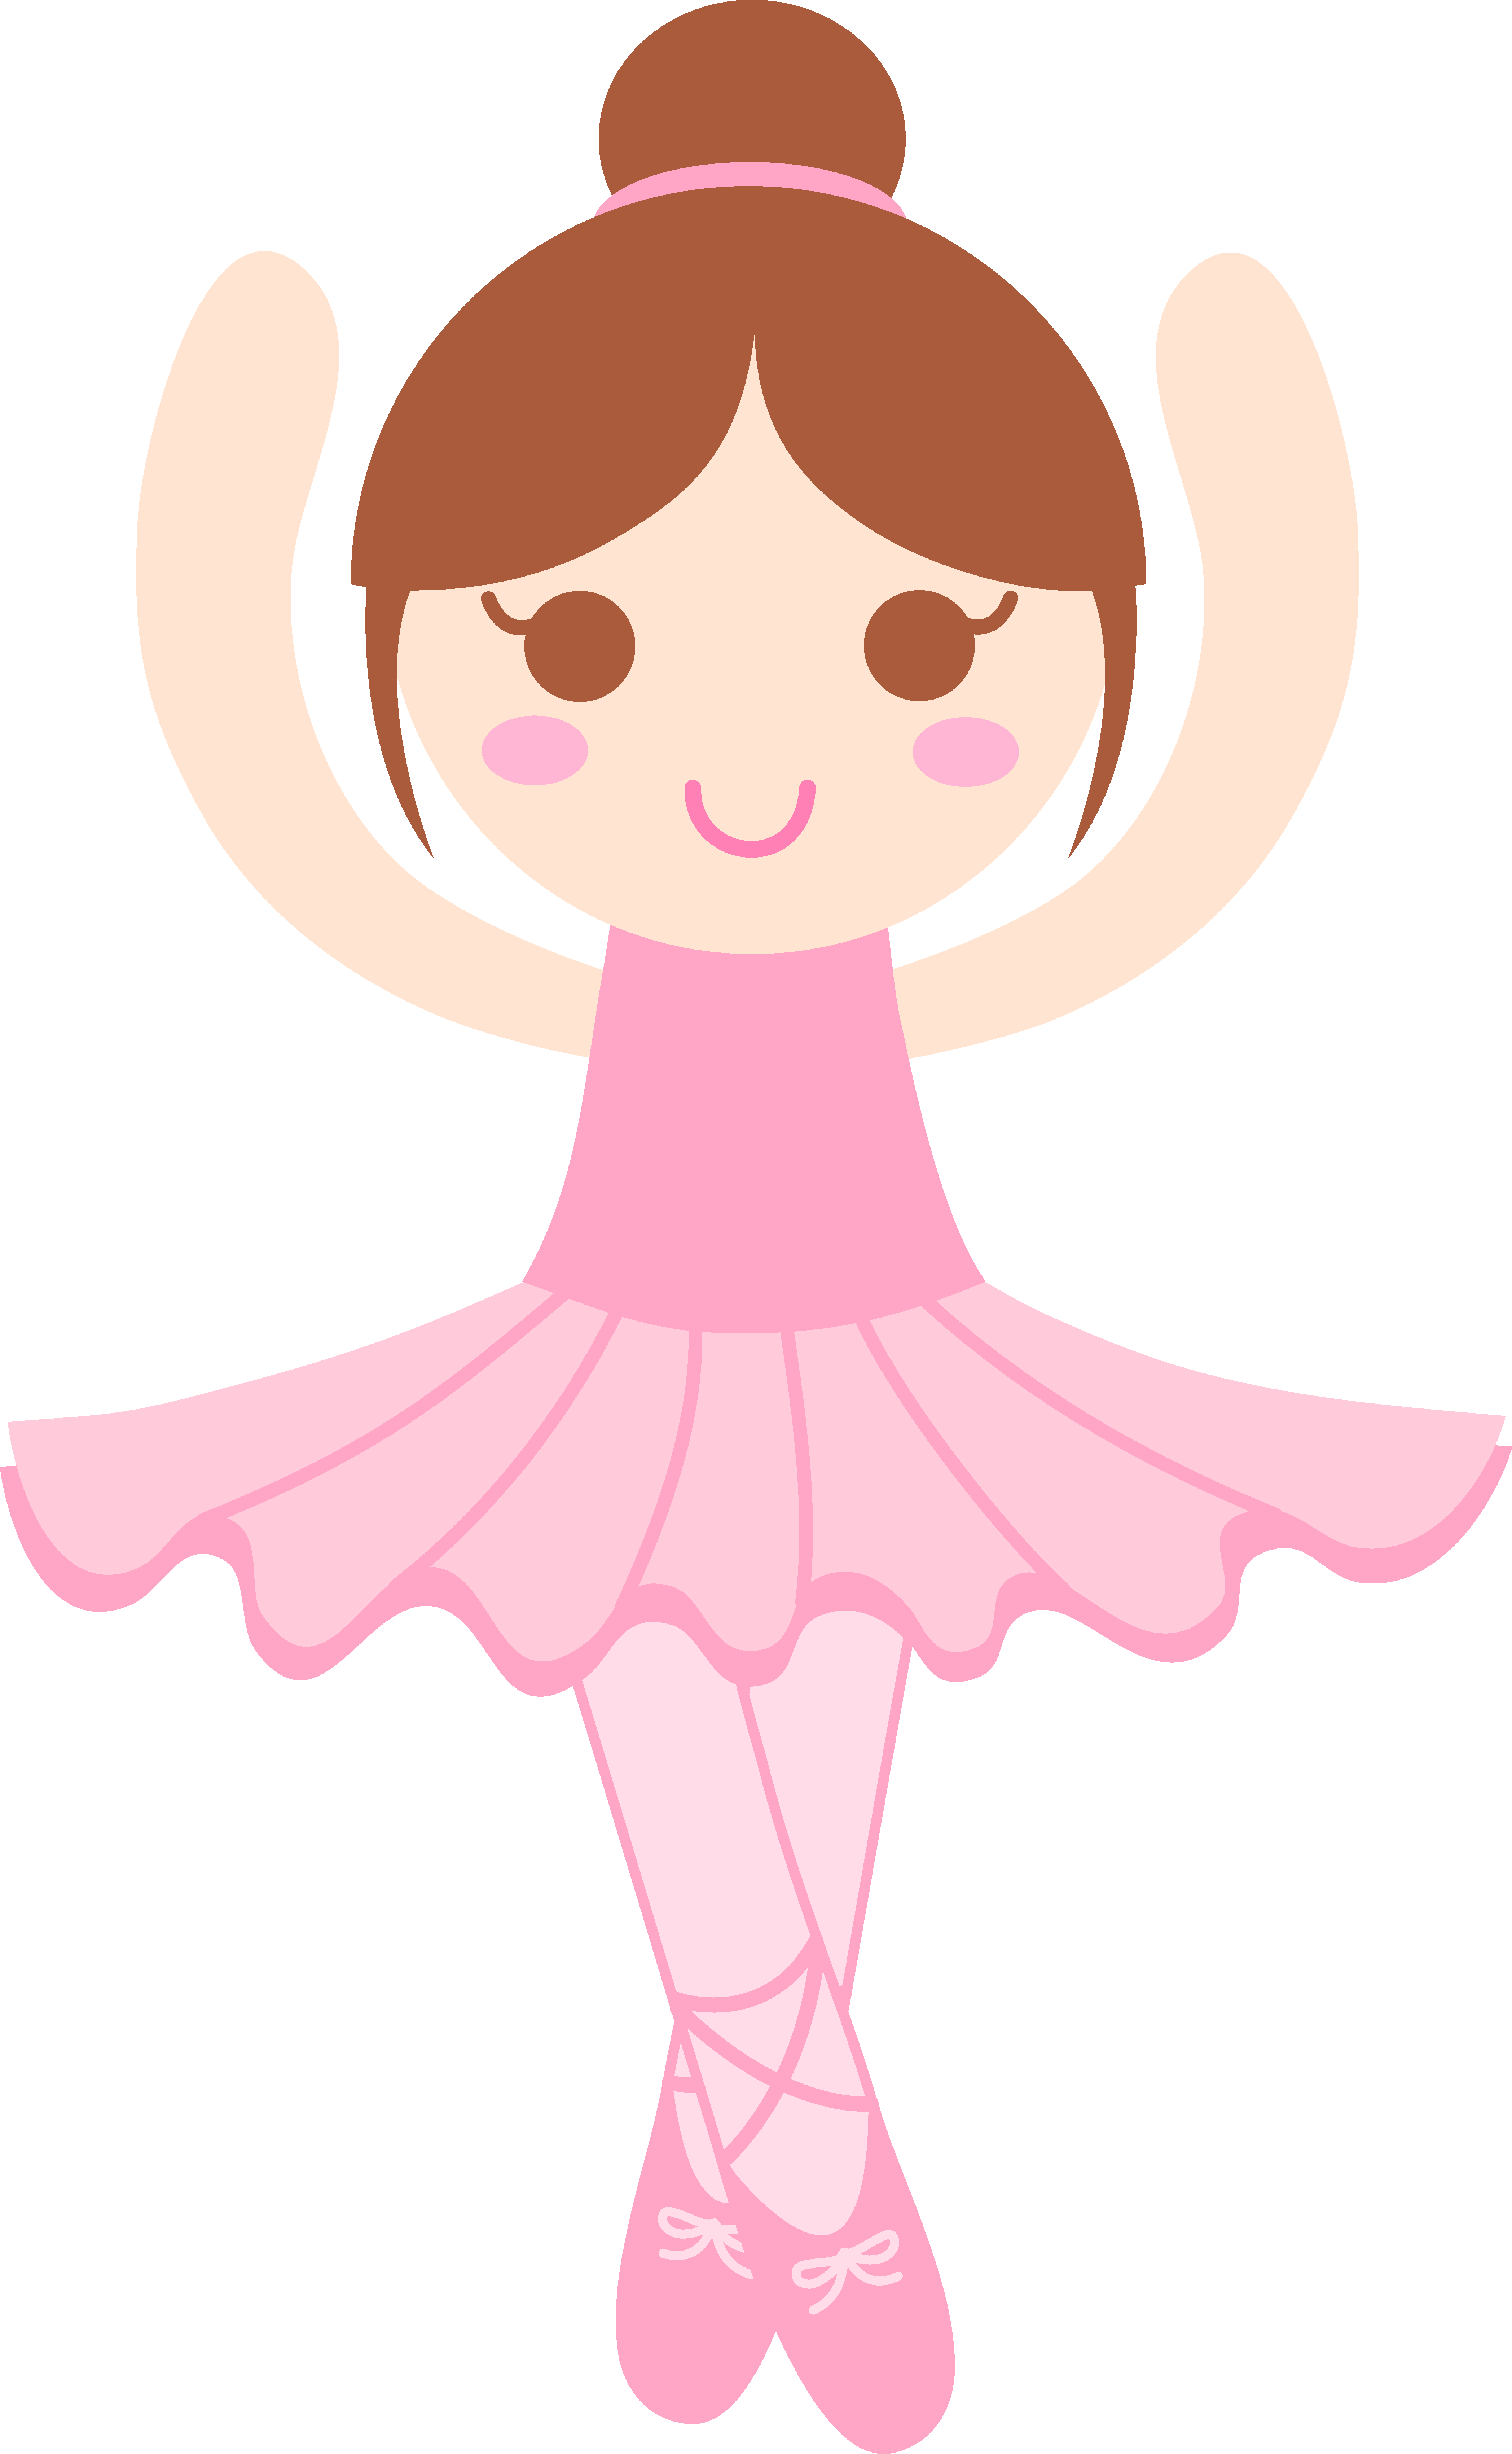 free-pictures-of-a-ballerina-download-free-pictures-of-a-ballerina-png-images-free-cliparts-on